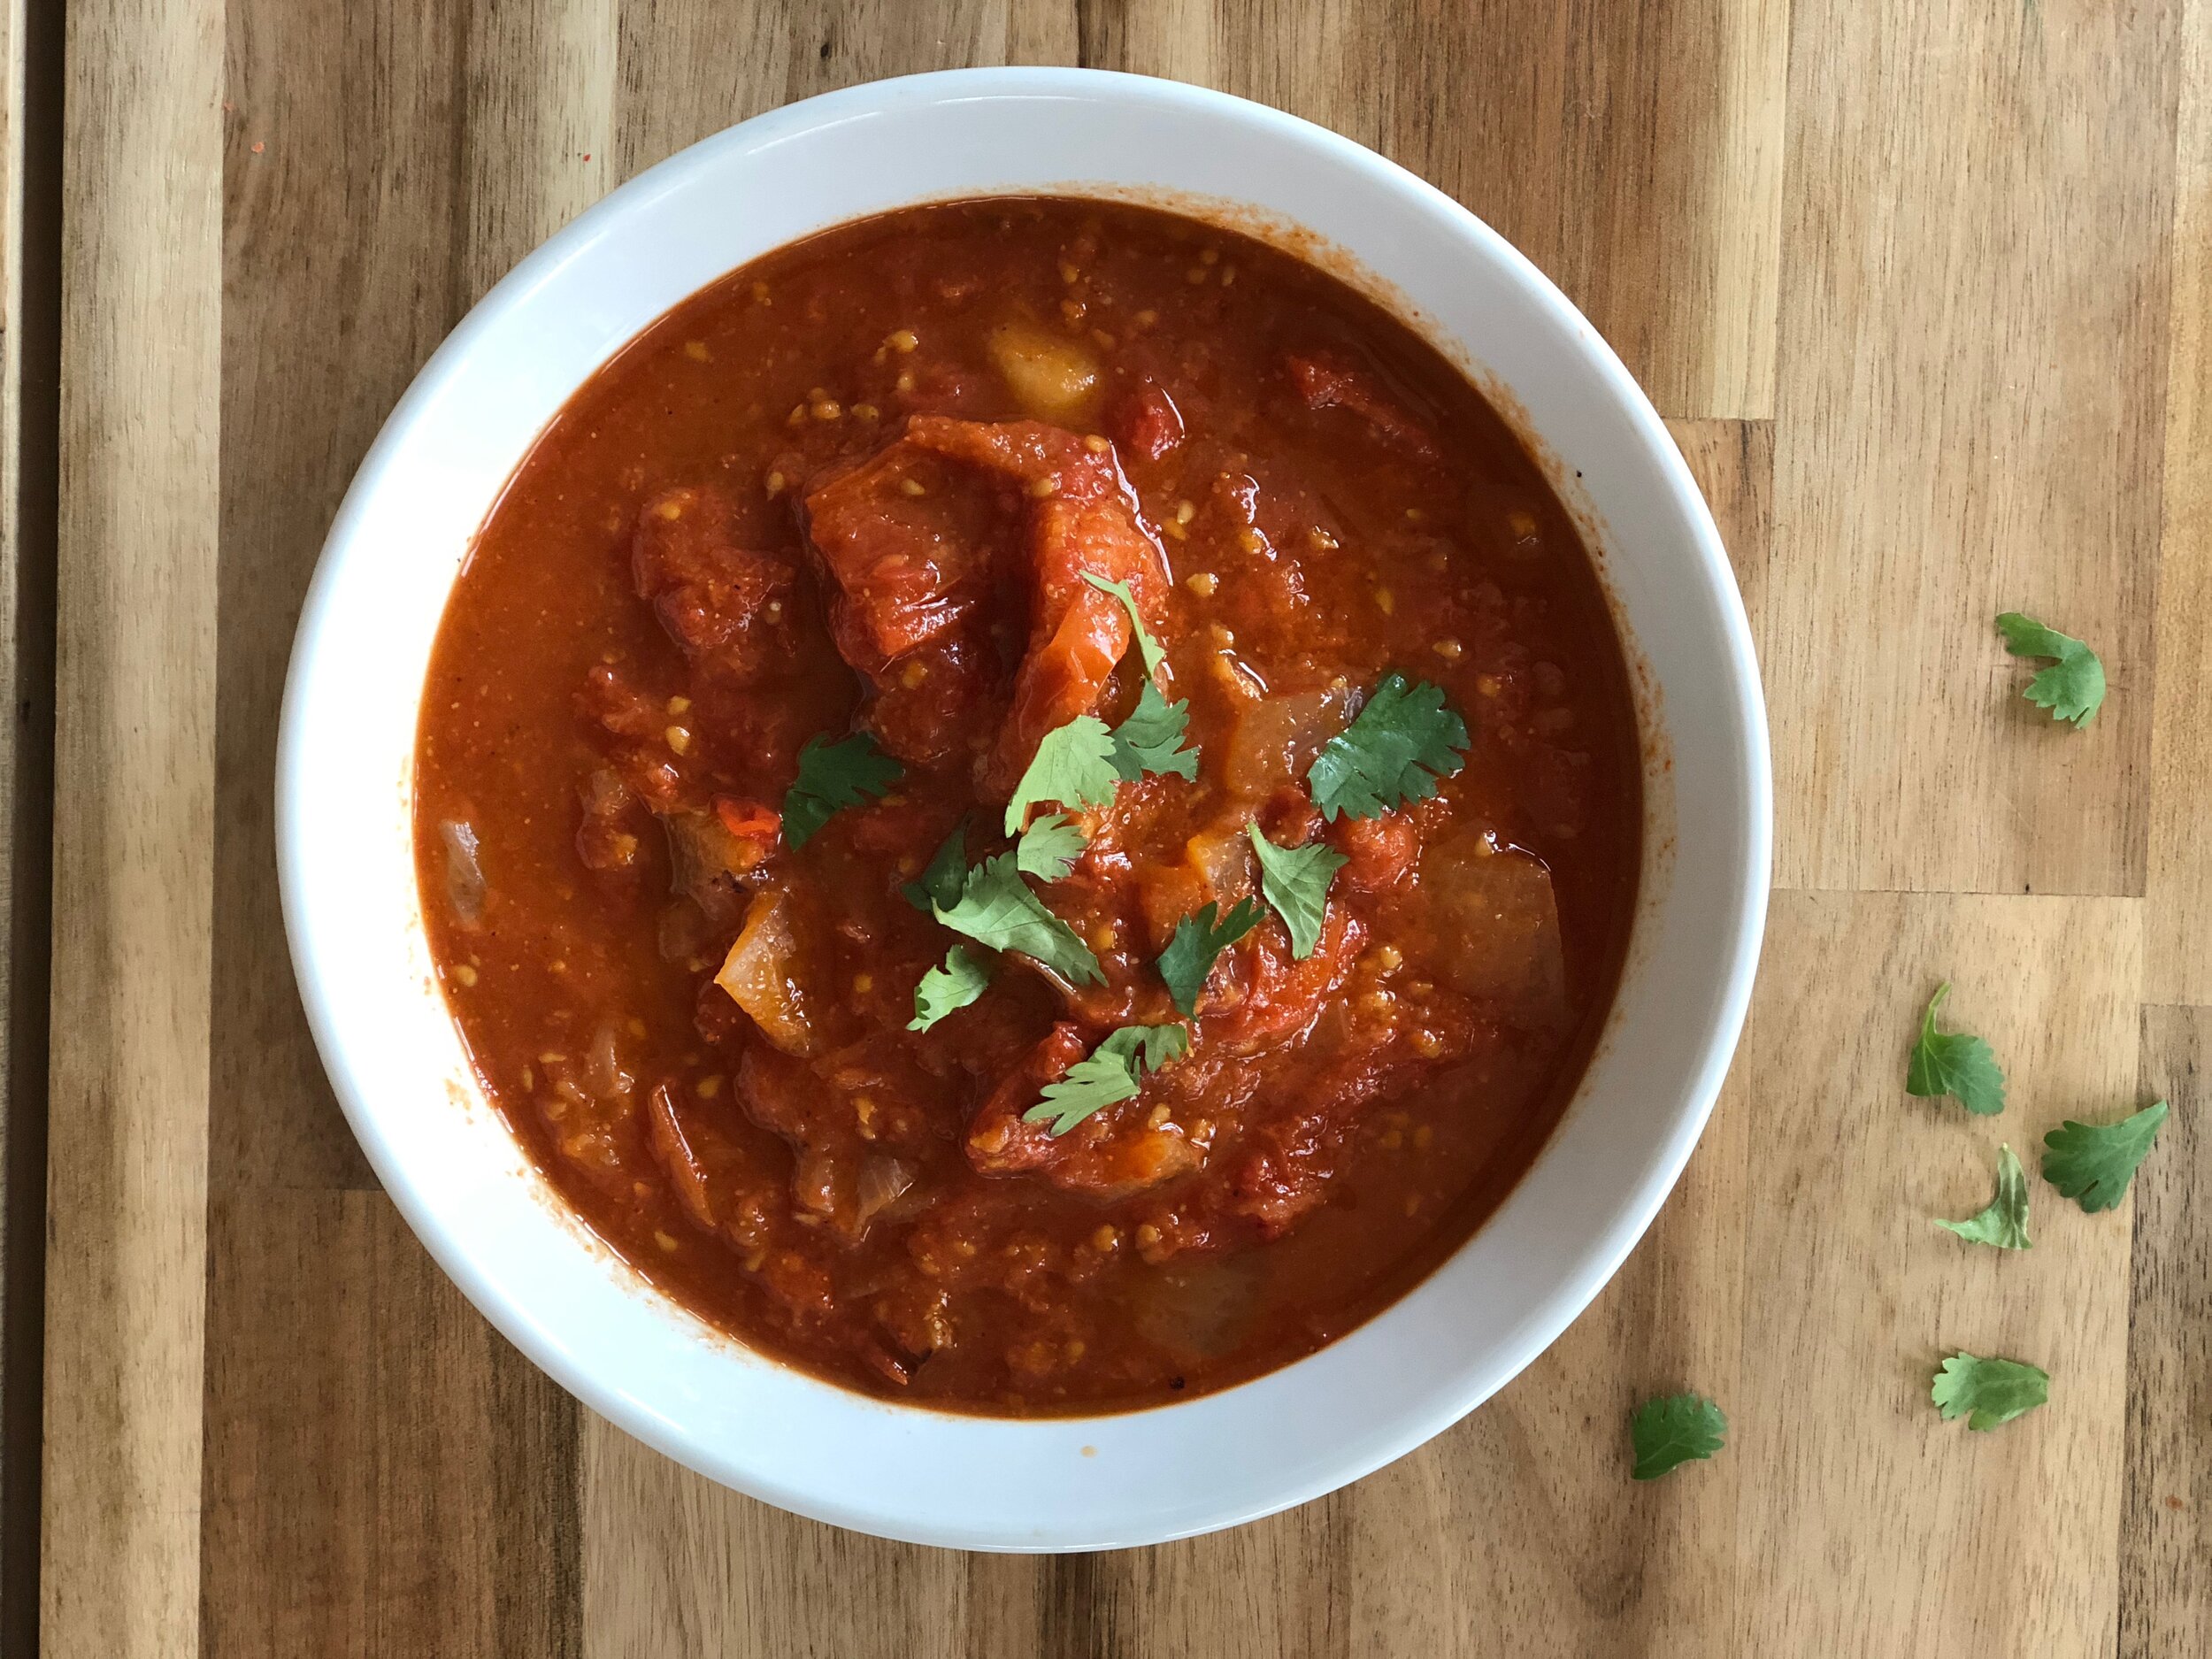 Simple Tomato Curry